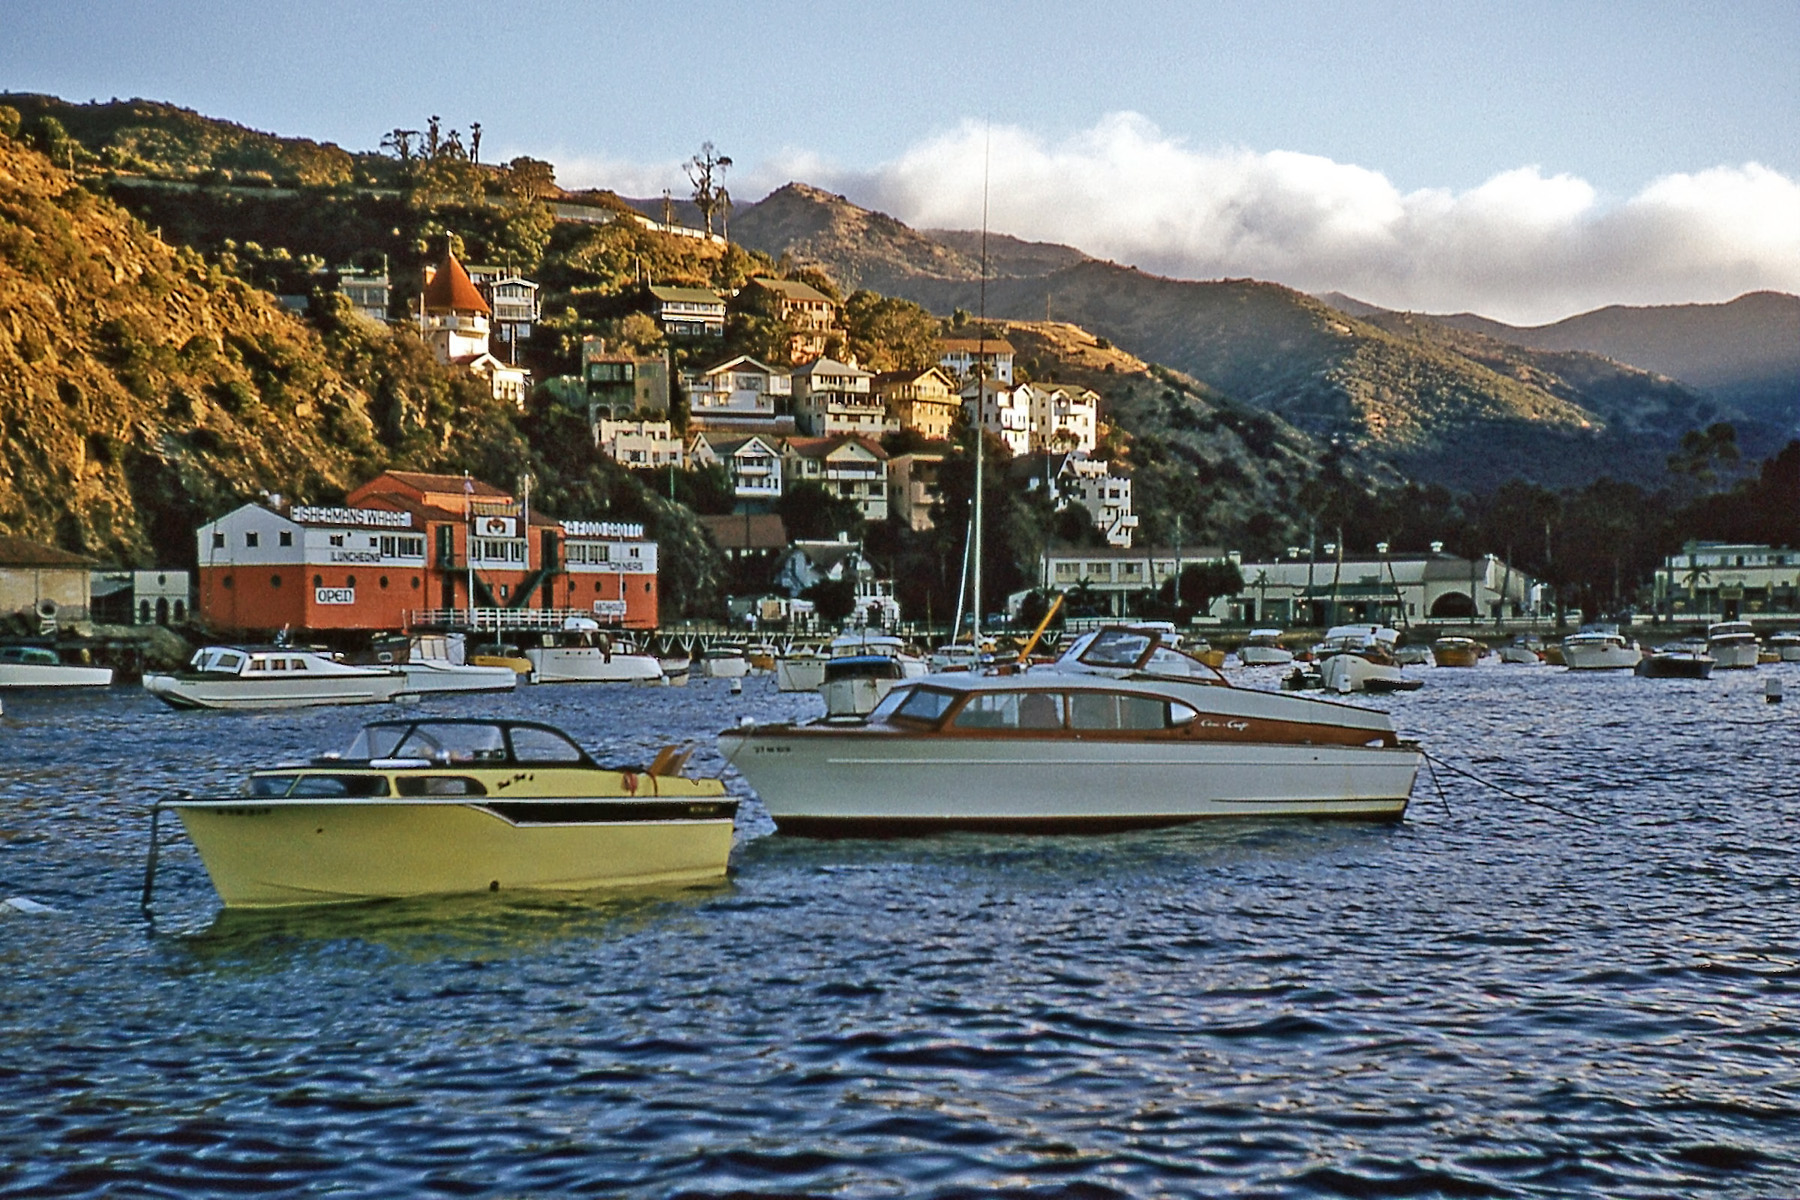 Catalina Harbor, California, September 1957. Taken by my dad with his trusty Contax. Kodachrome slide. View full size.